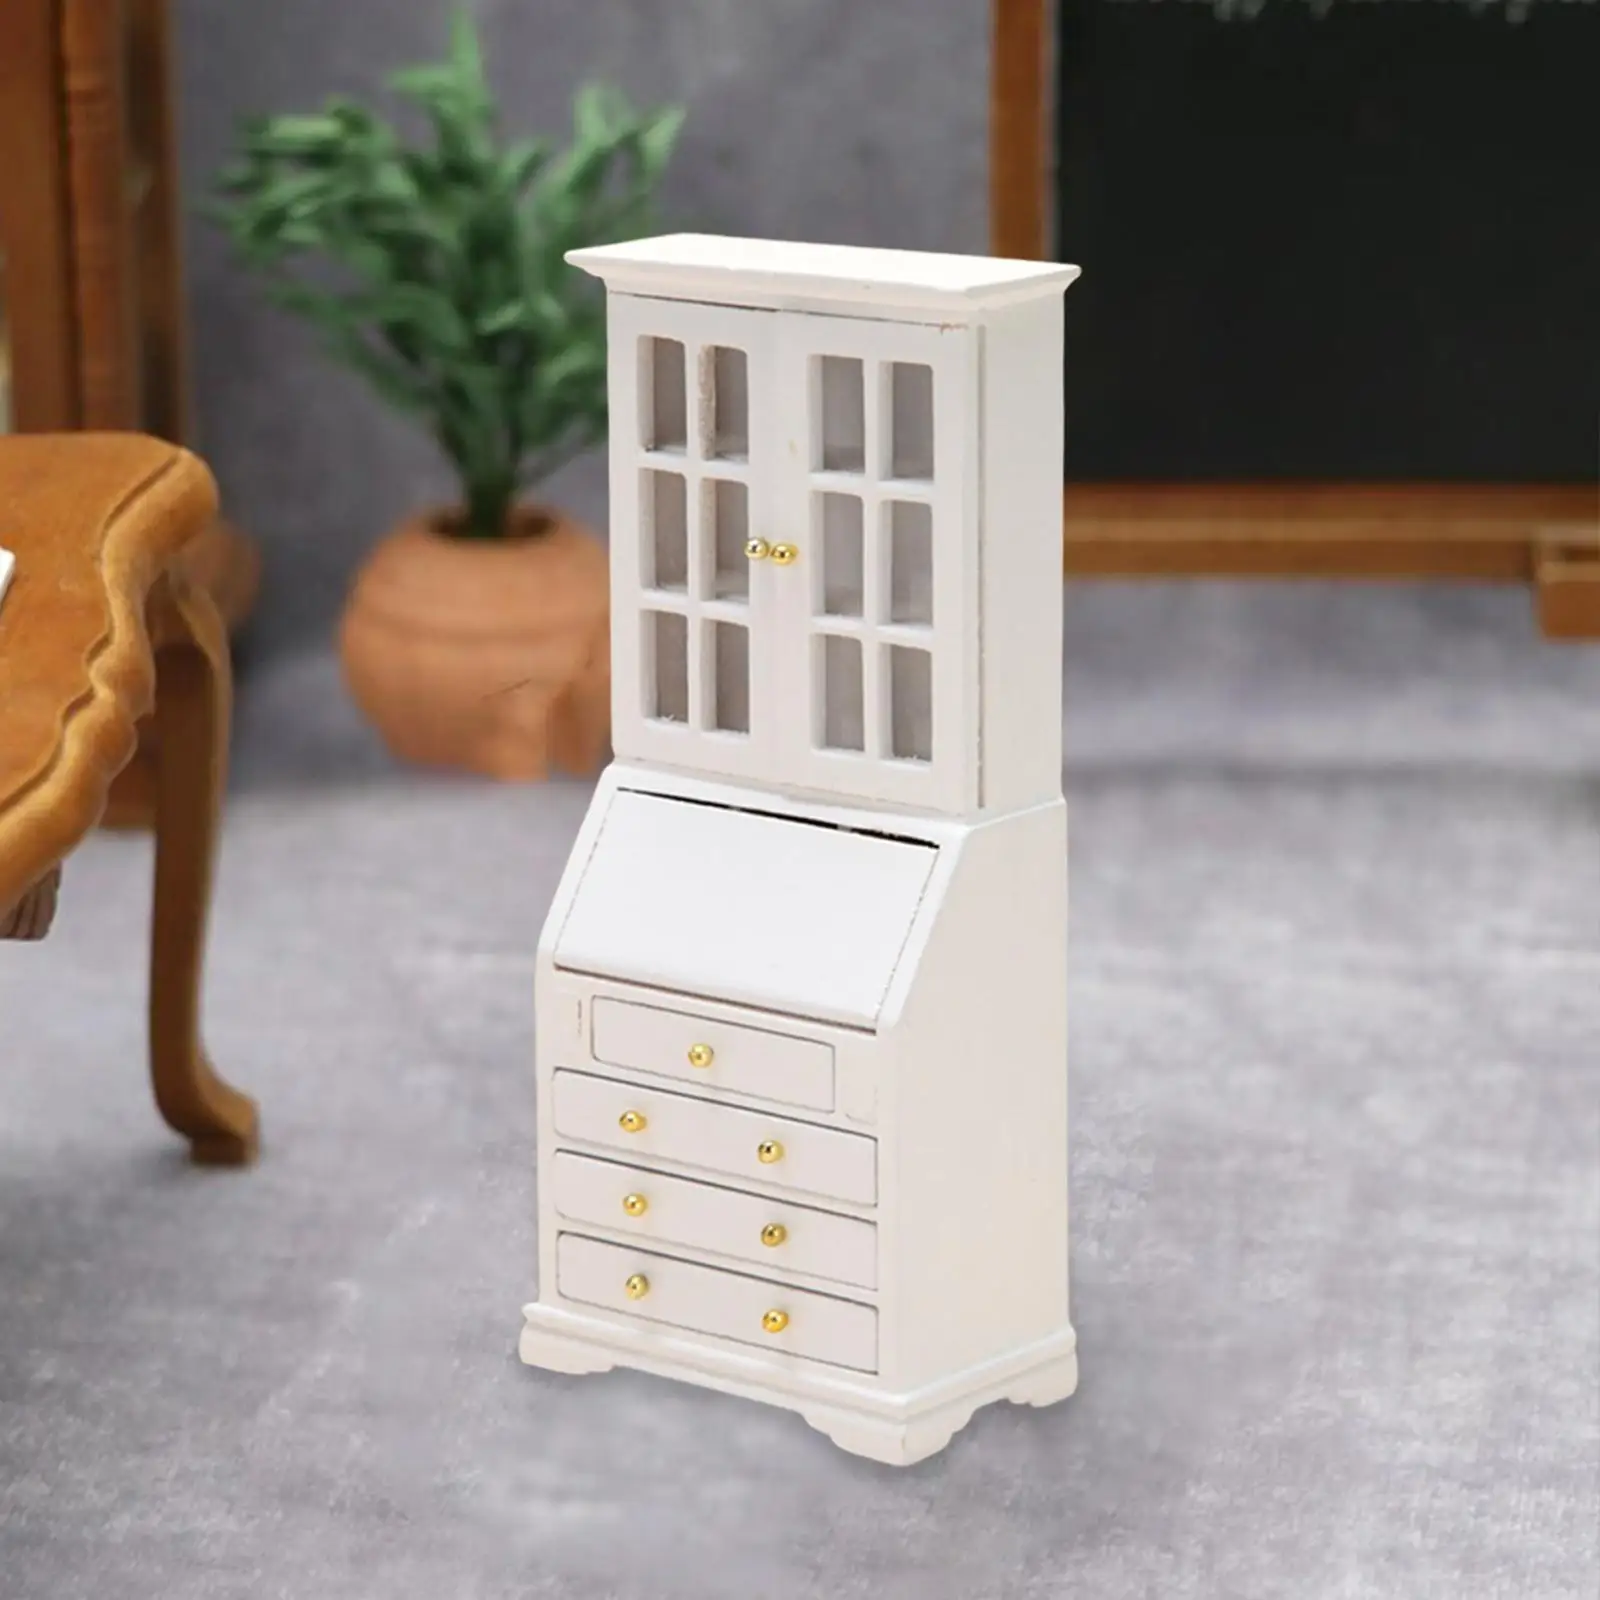 1/12 Dollhouse Bookcase Storage Cabinet Wood Model Study Decor Doll House Accessories Simulated Landscape 2.7x1.5x6inch Delicate